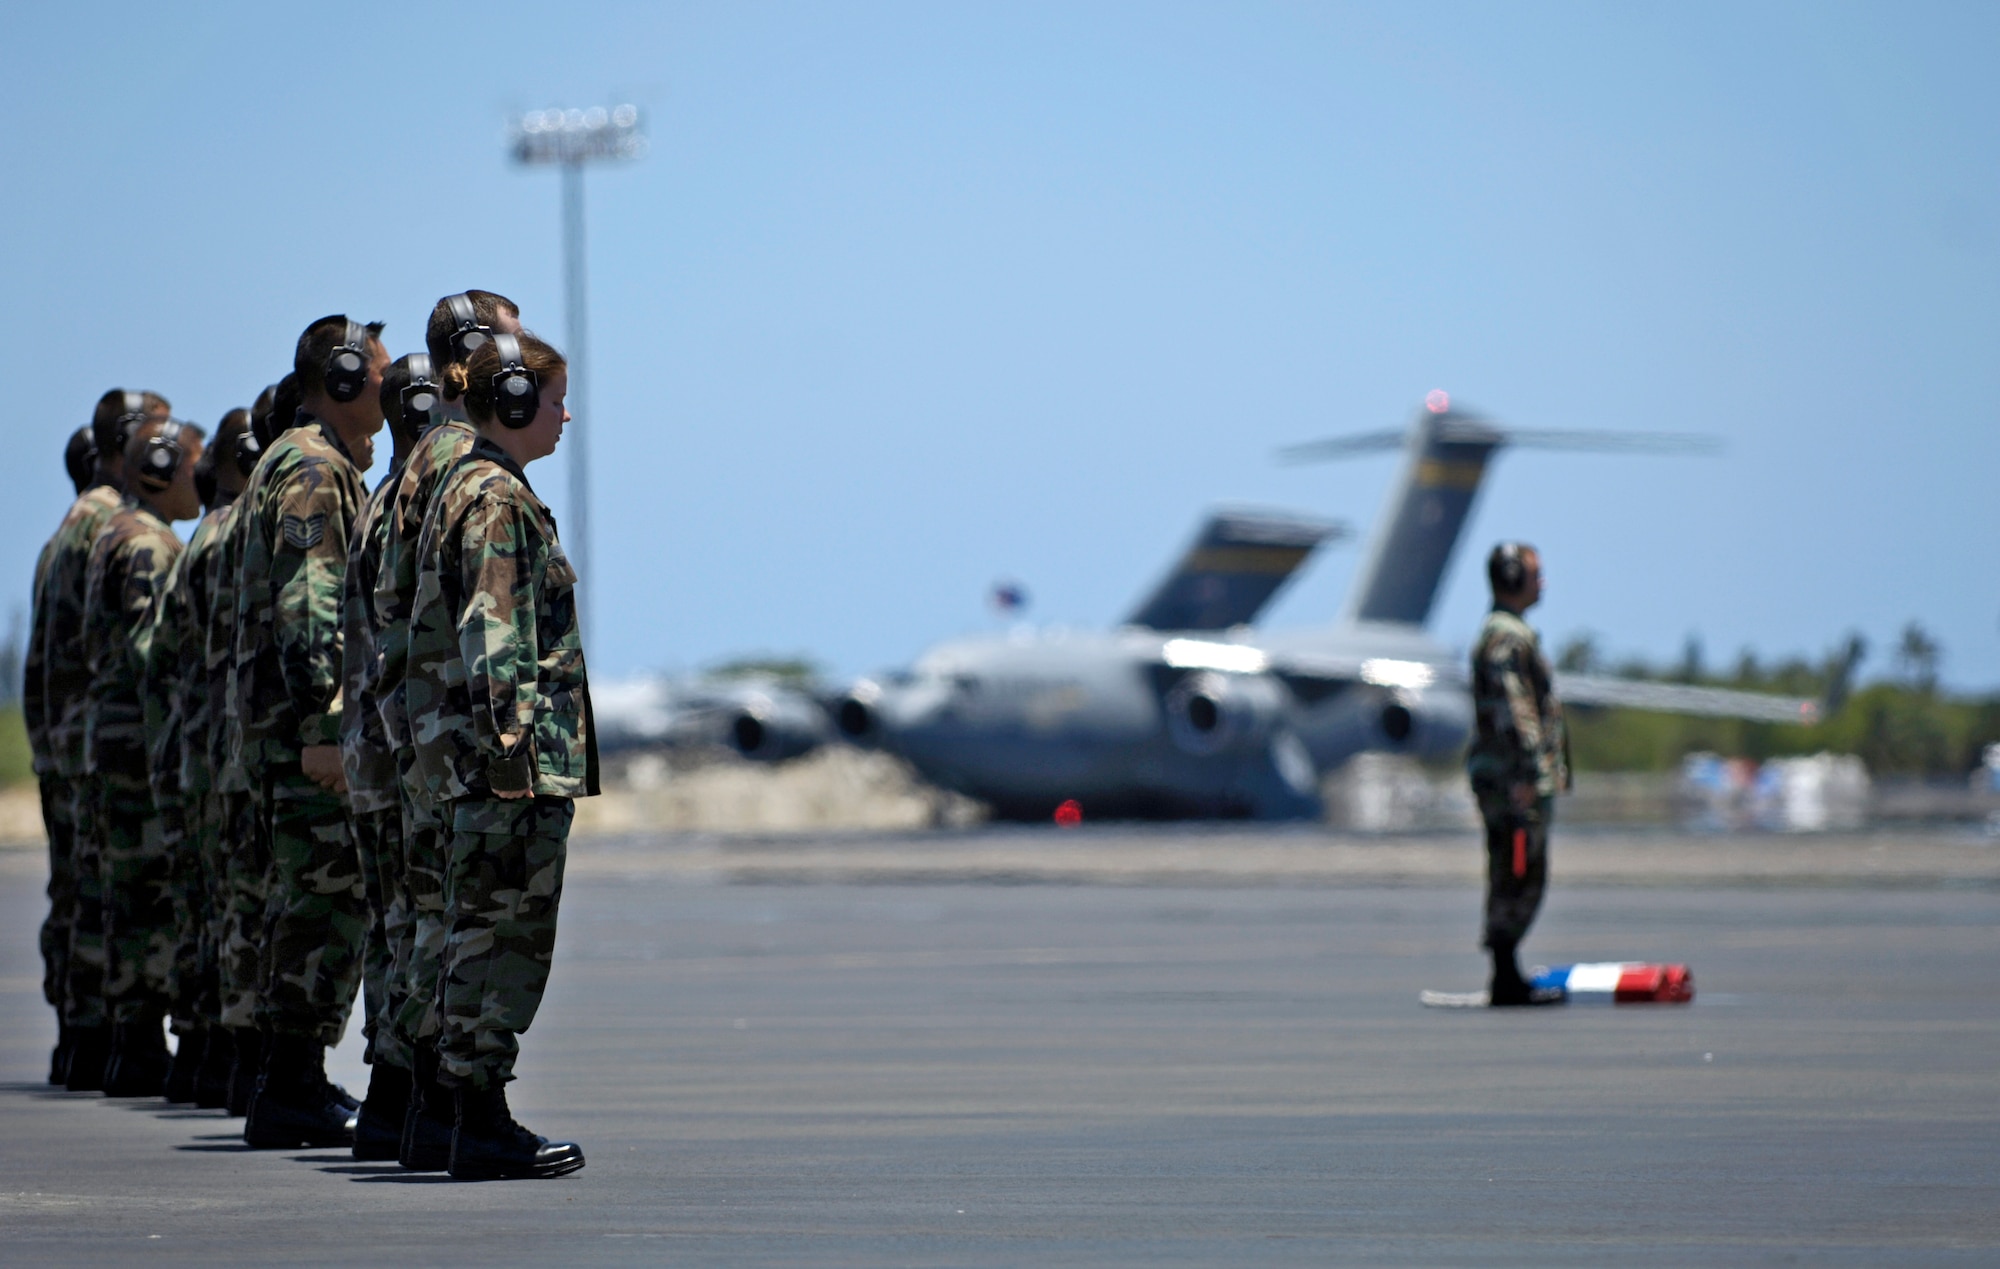 Aircraft maintainers stand at attention while waiting for a C-17 Globemaster III to taxi to its parking spot at Hickam Air Force Base, Hawaii, on July 18.  The "Spirit of Kamehameha- Imua" is the eighth and final C-17 for the 15th Airlift Wing at Hickam. It marks the successful transformation for the 15th AW from a support unit to an operational strategic airlift wing. The maintainers are active duty Airmen and Hawaii Air National Guardsmen. (U.S. Air Force photo/Tech. Sgt. Shane A. Cuomo)